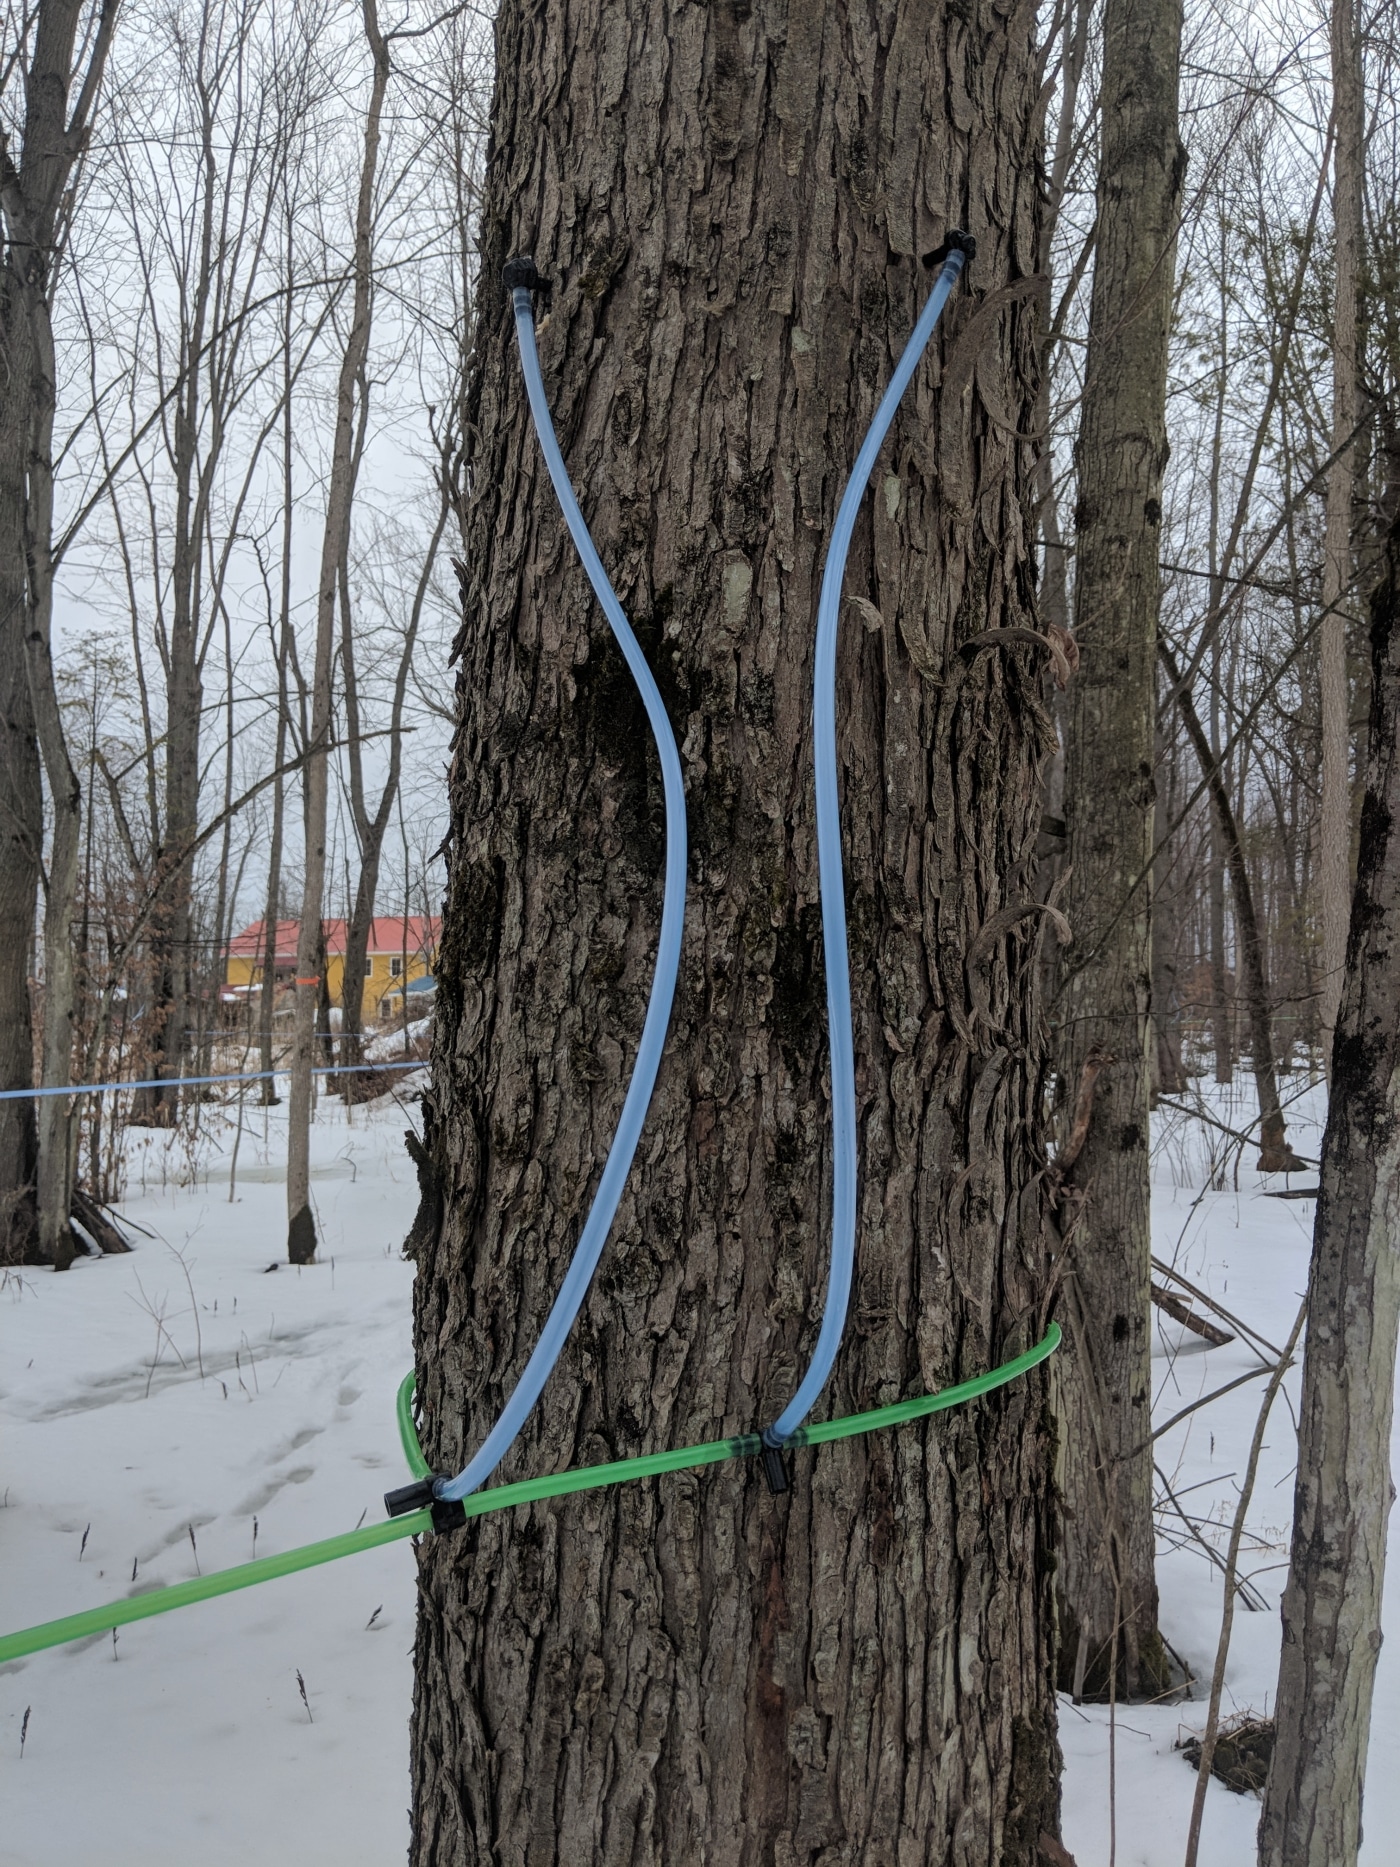 DIY maple tapping system